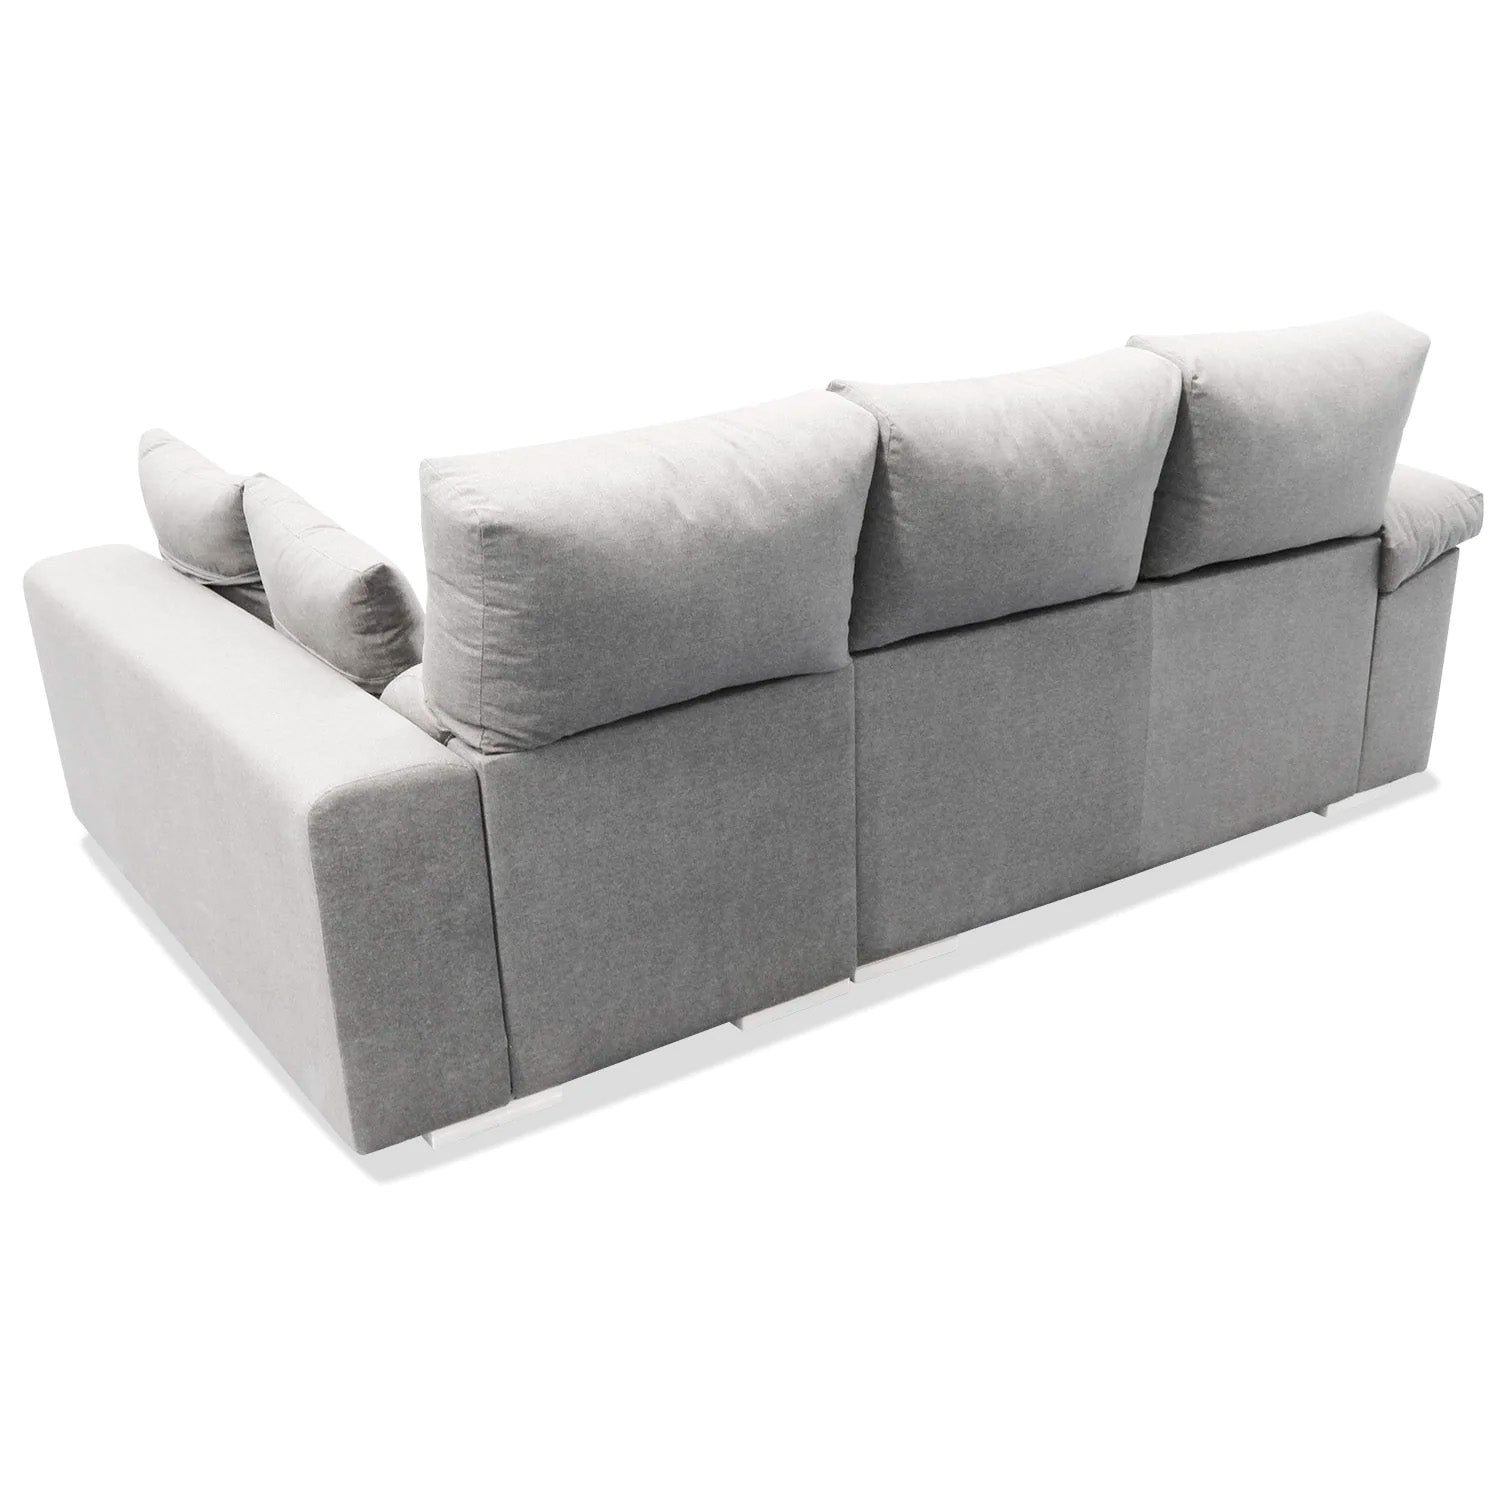 Sofá chaise longue Suiza 250 cm – Lowcosthome